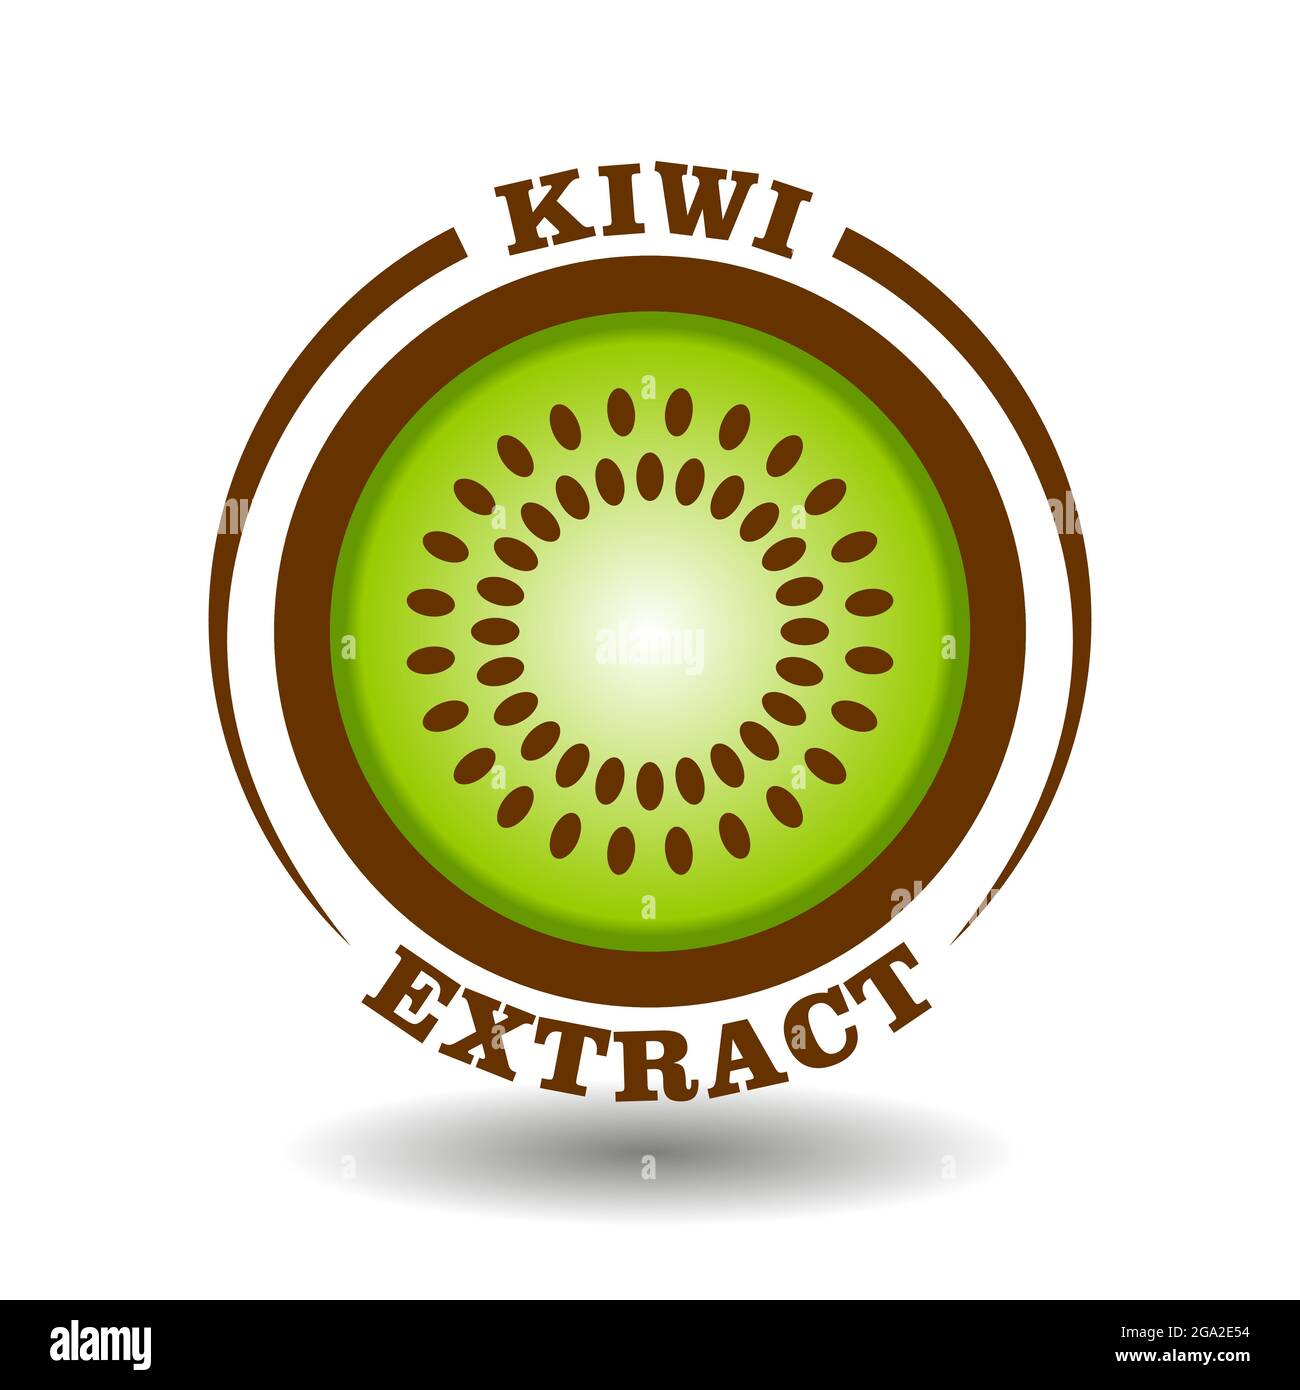 Creative circle logo Kiwi with round half cut of fruit slice icon and circle seeds symbol for labeling product contain natural organic kiwi fruit extr Stock Vector